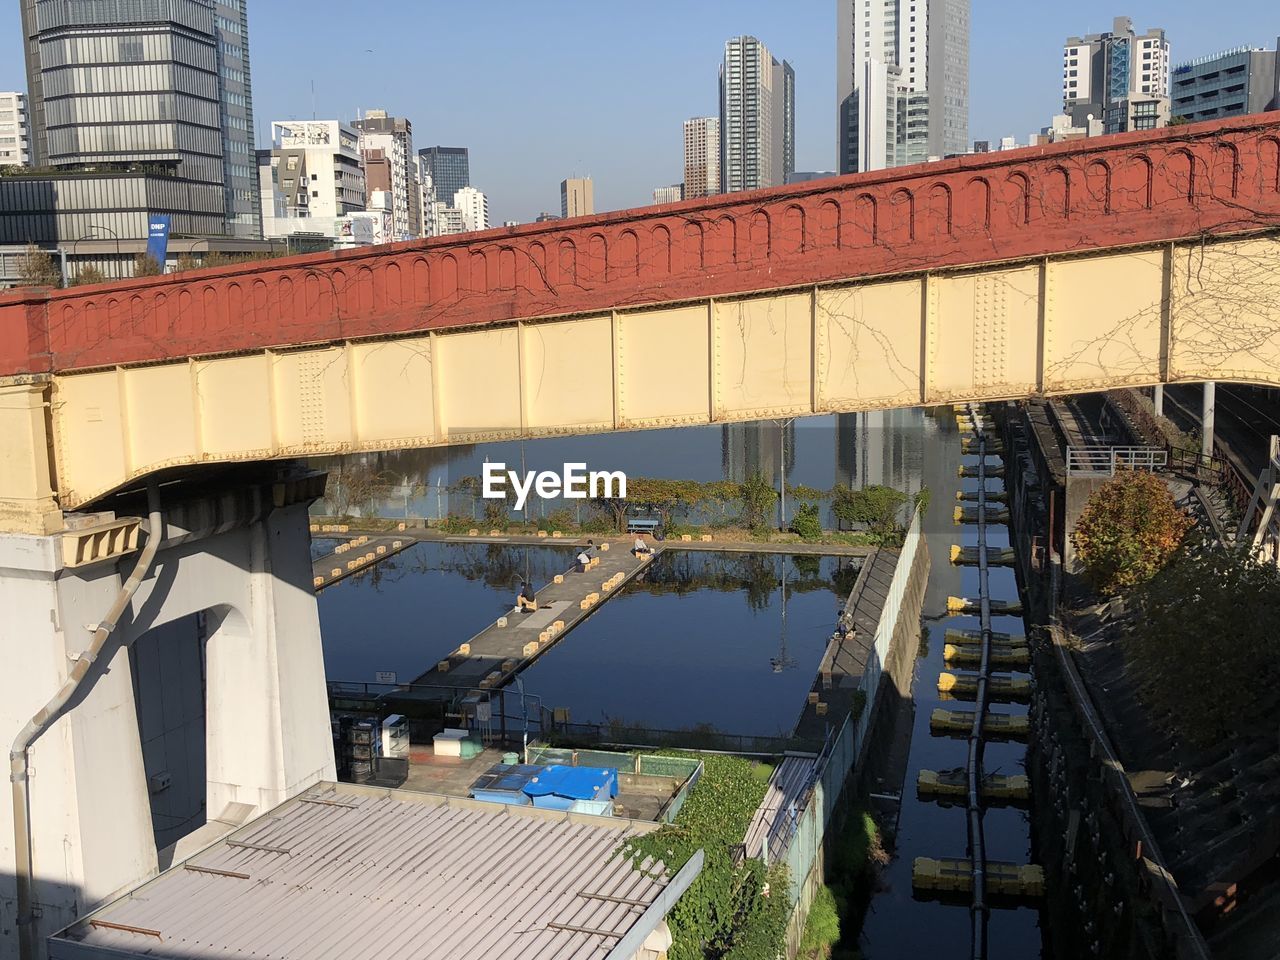 HIGH ANGLE VIEW OF BRIDGE OVER RIVER AMIDST BUILDINGS